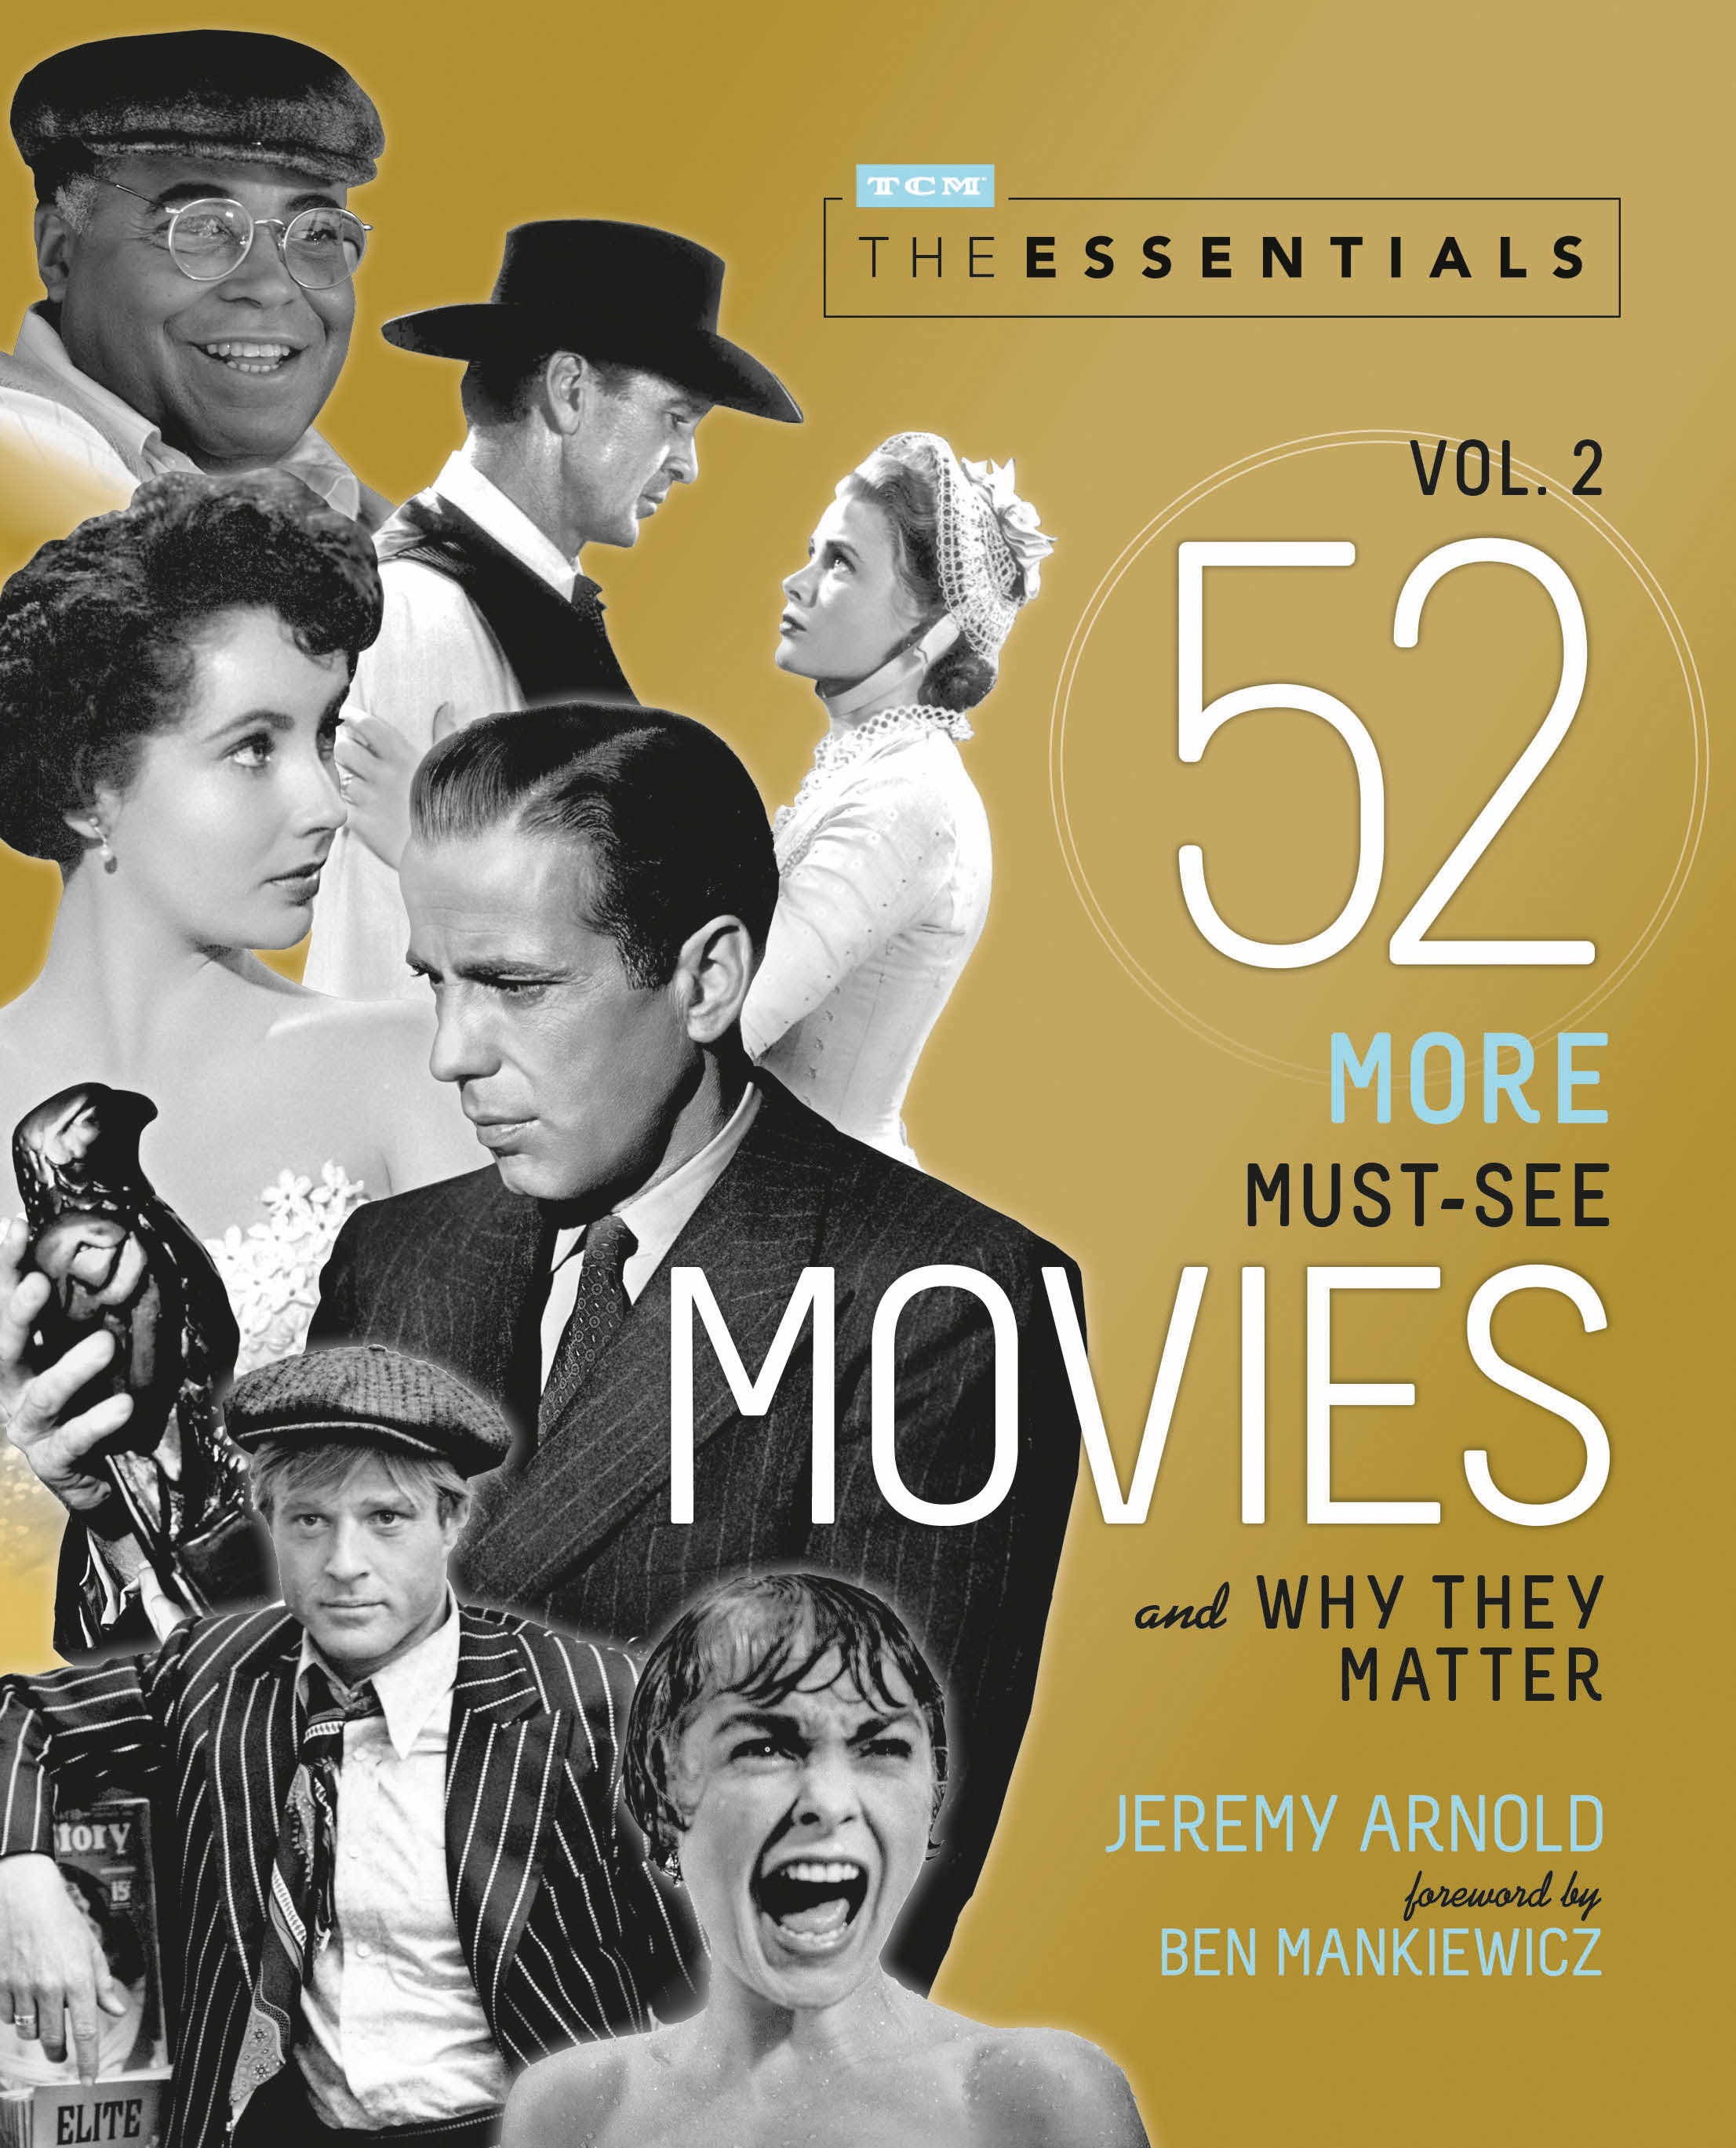 Holiday Gifts Down Memory Lane with Turner Classic Movies (TCM)